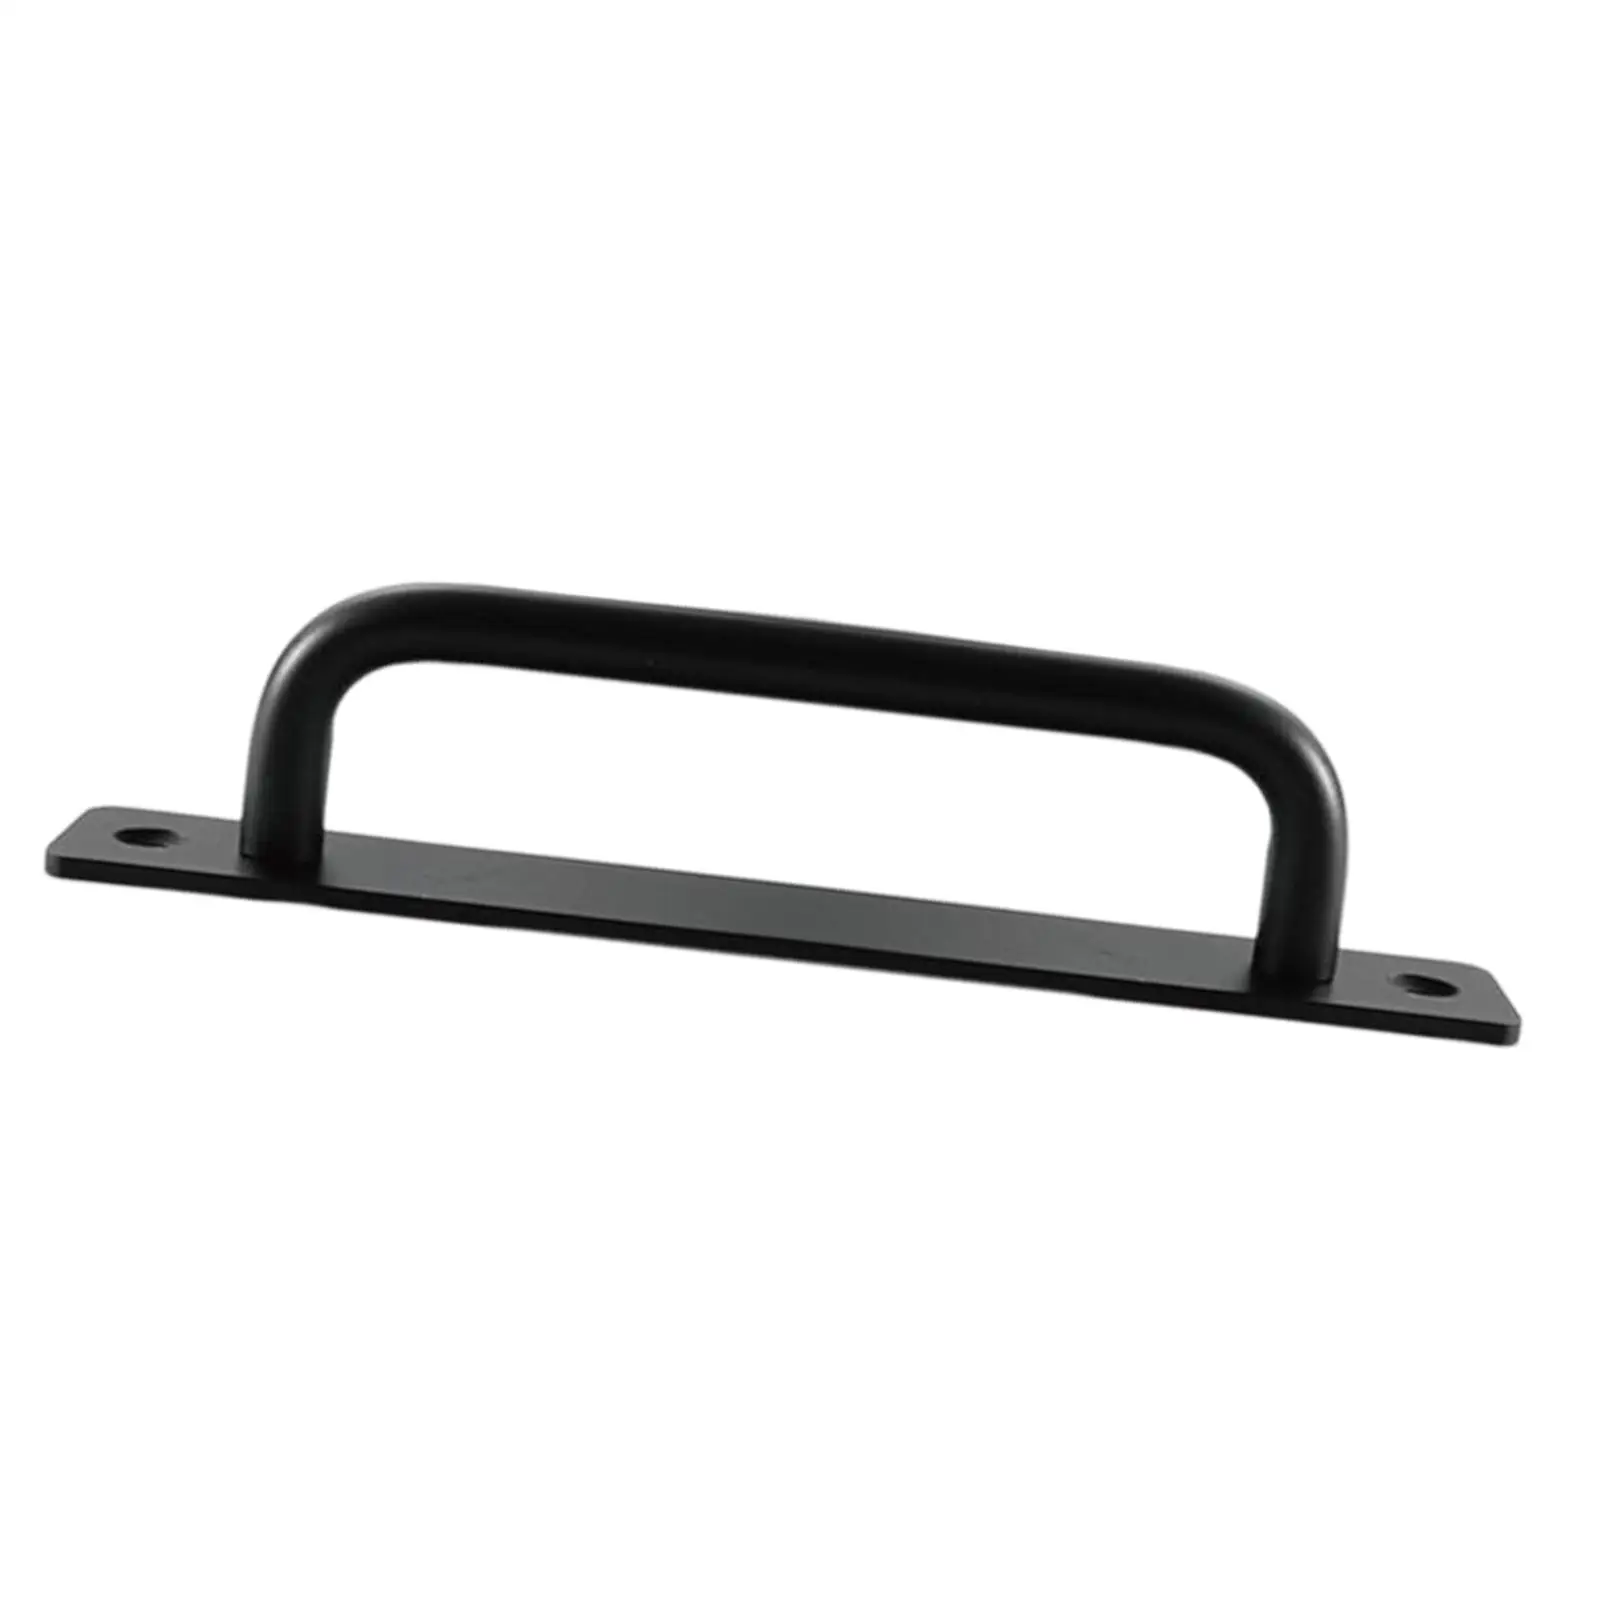 Cabinet Door Gate Handle Pull Metal for Room Doors, Kitchen Drawers Accessories , Easy to Install and Use Durable Hardware